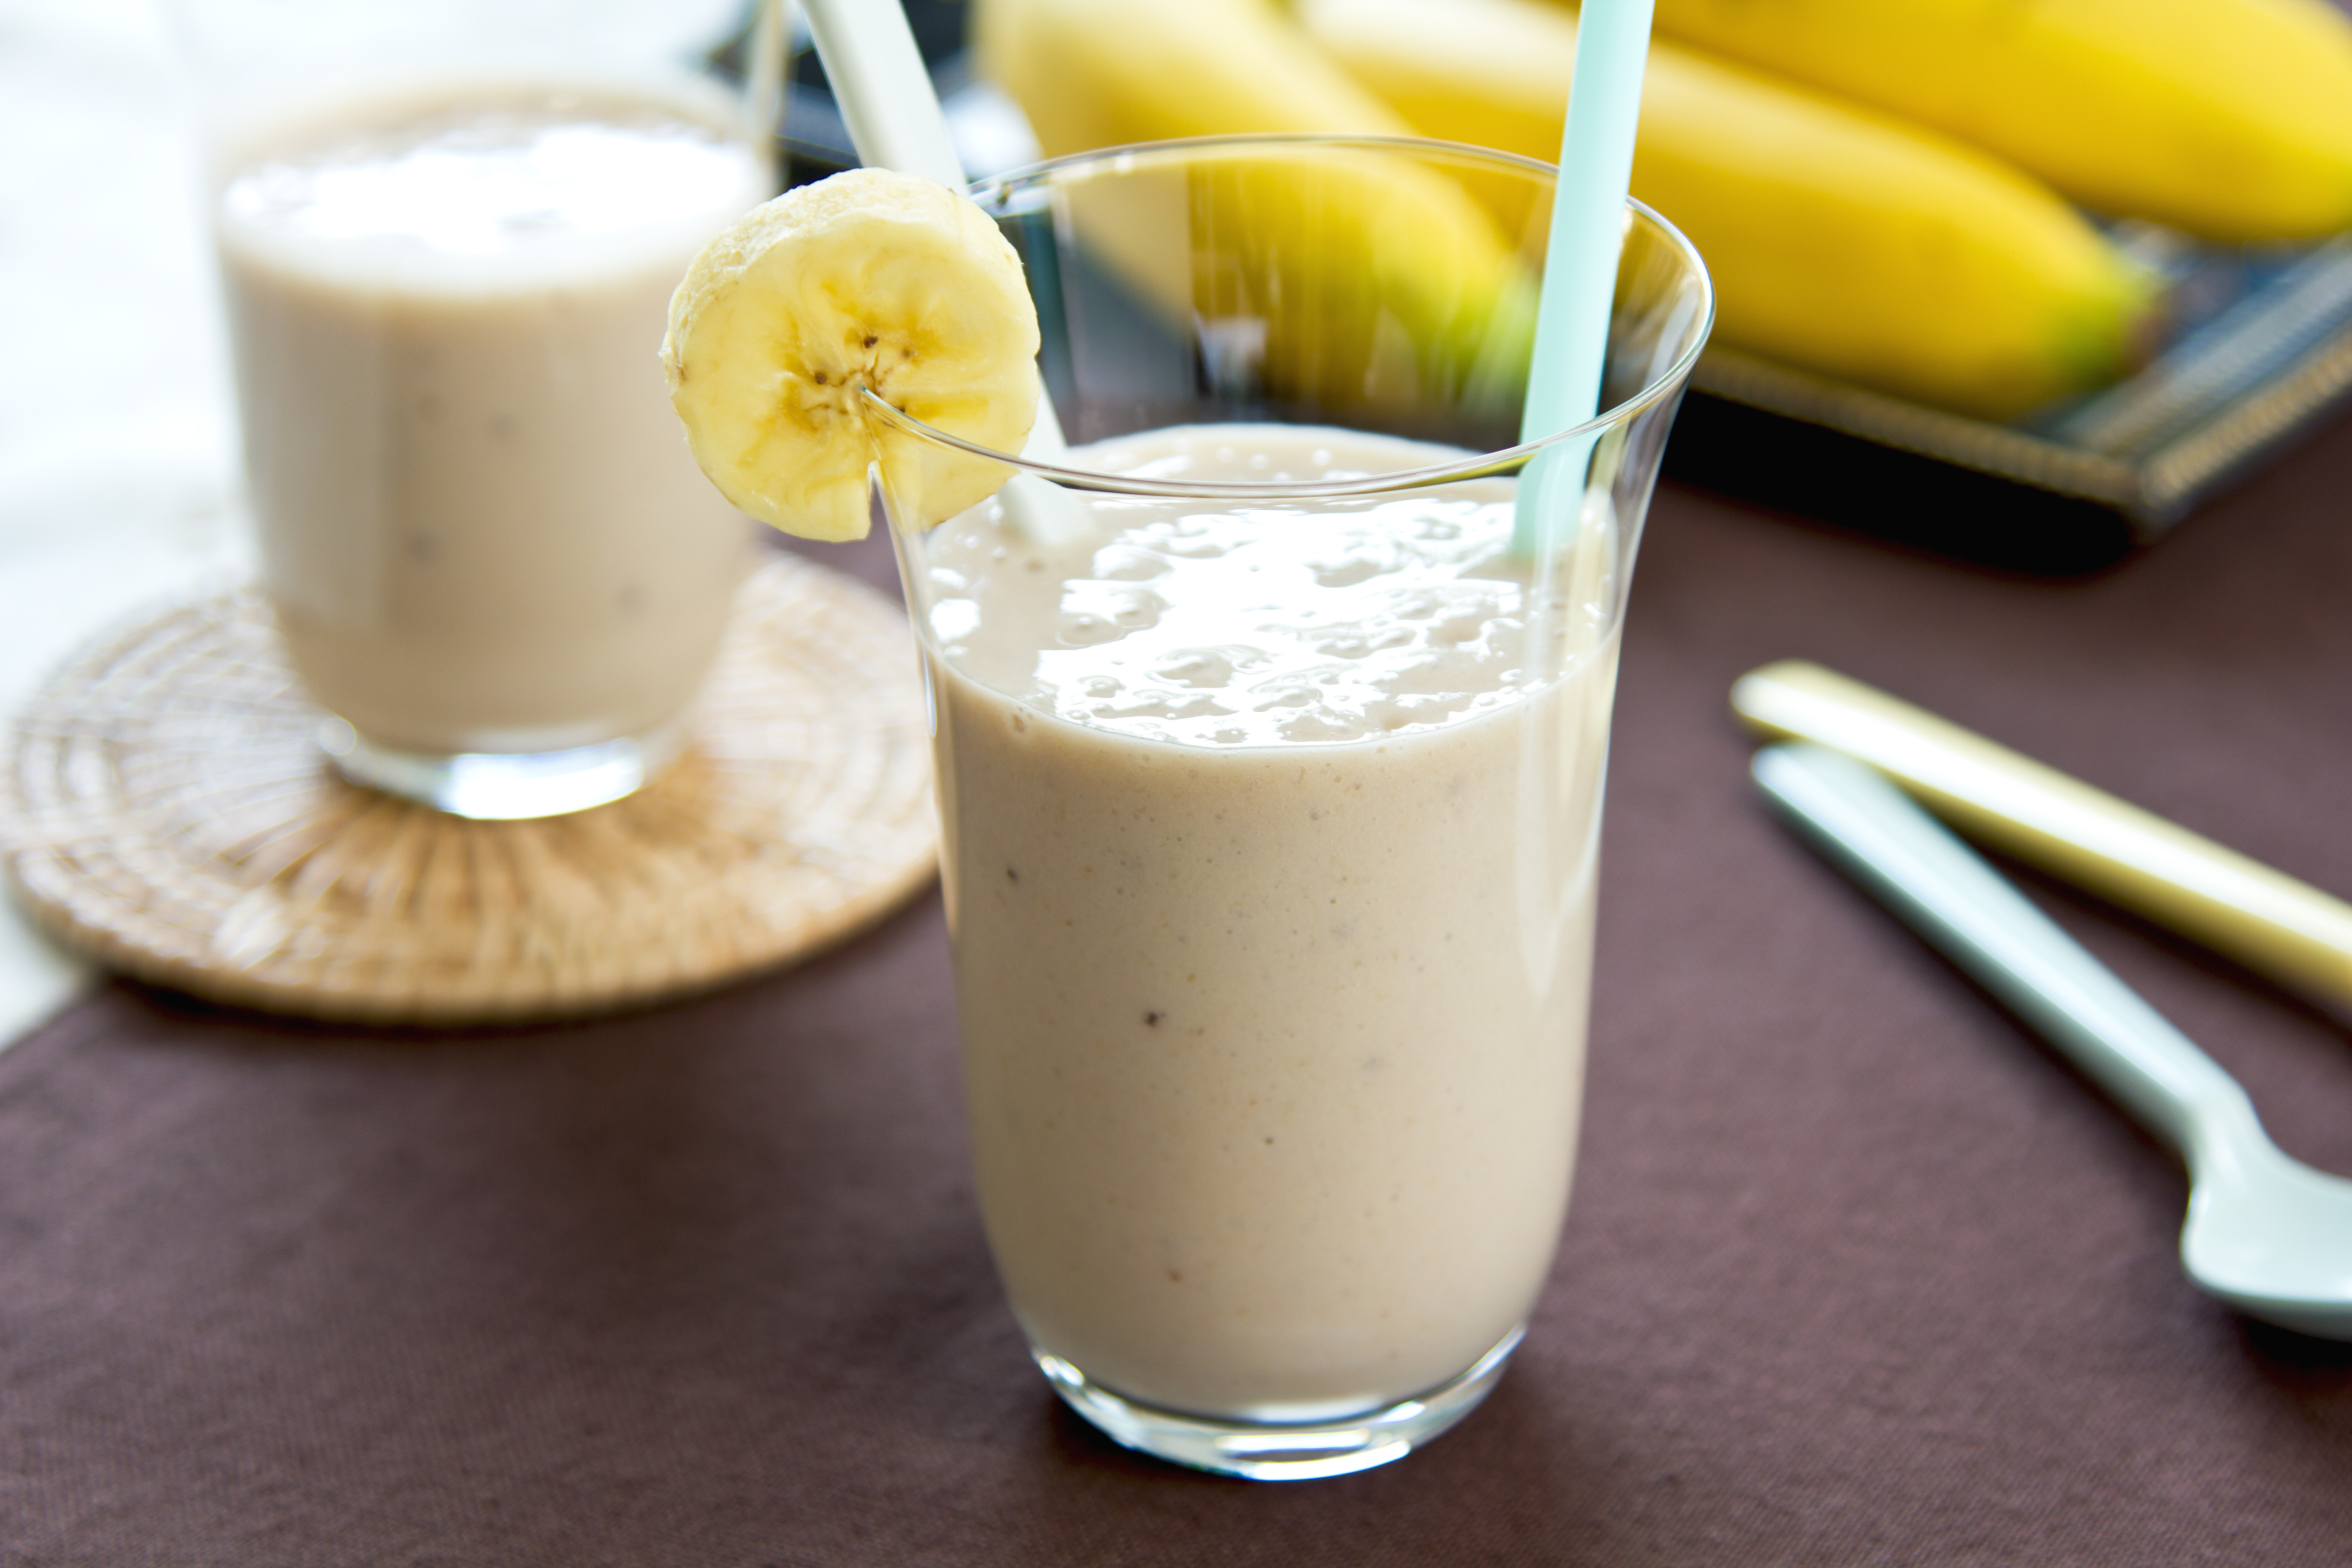 Banana smoothie by fresh smoothie